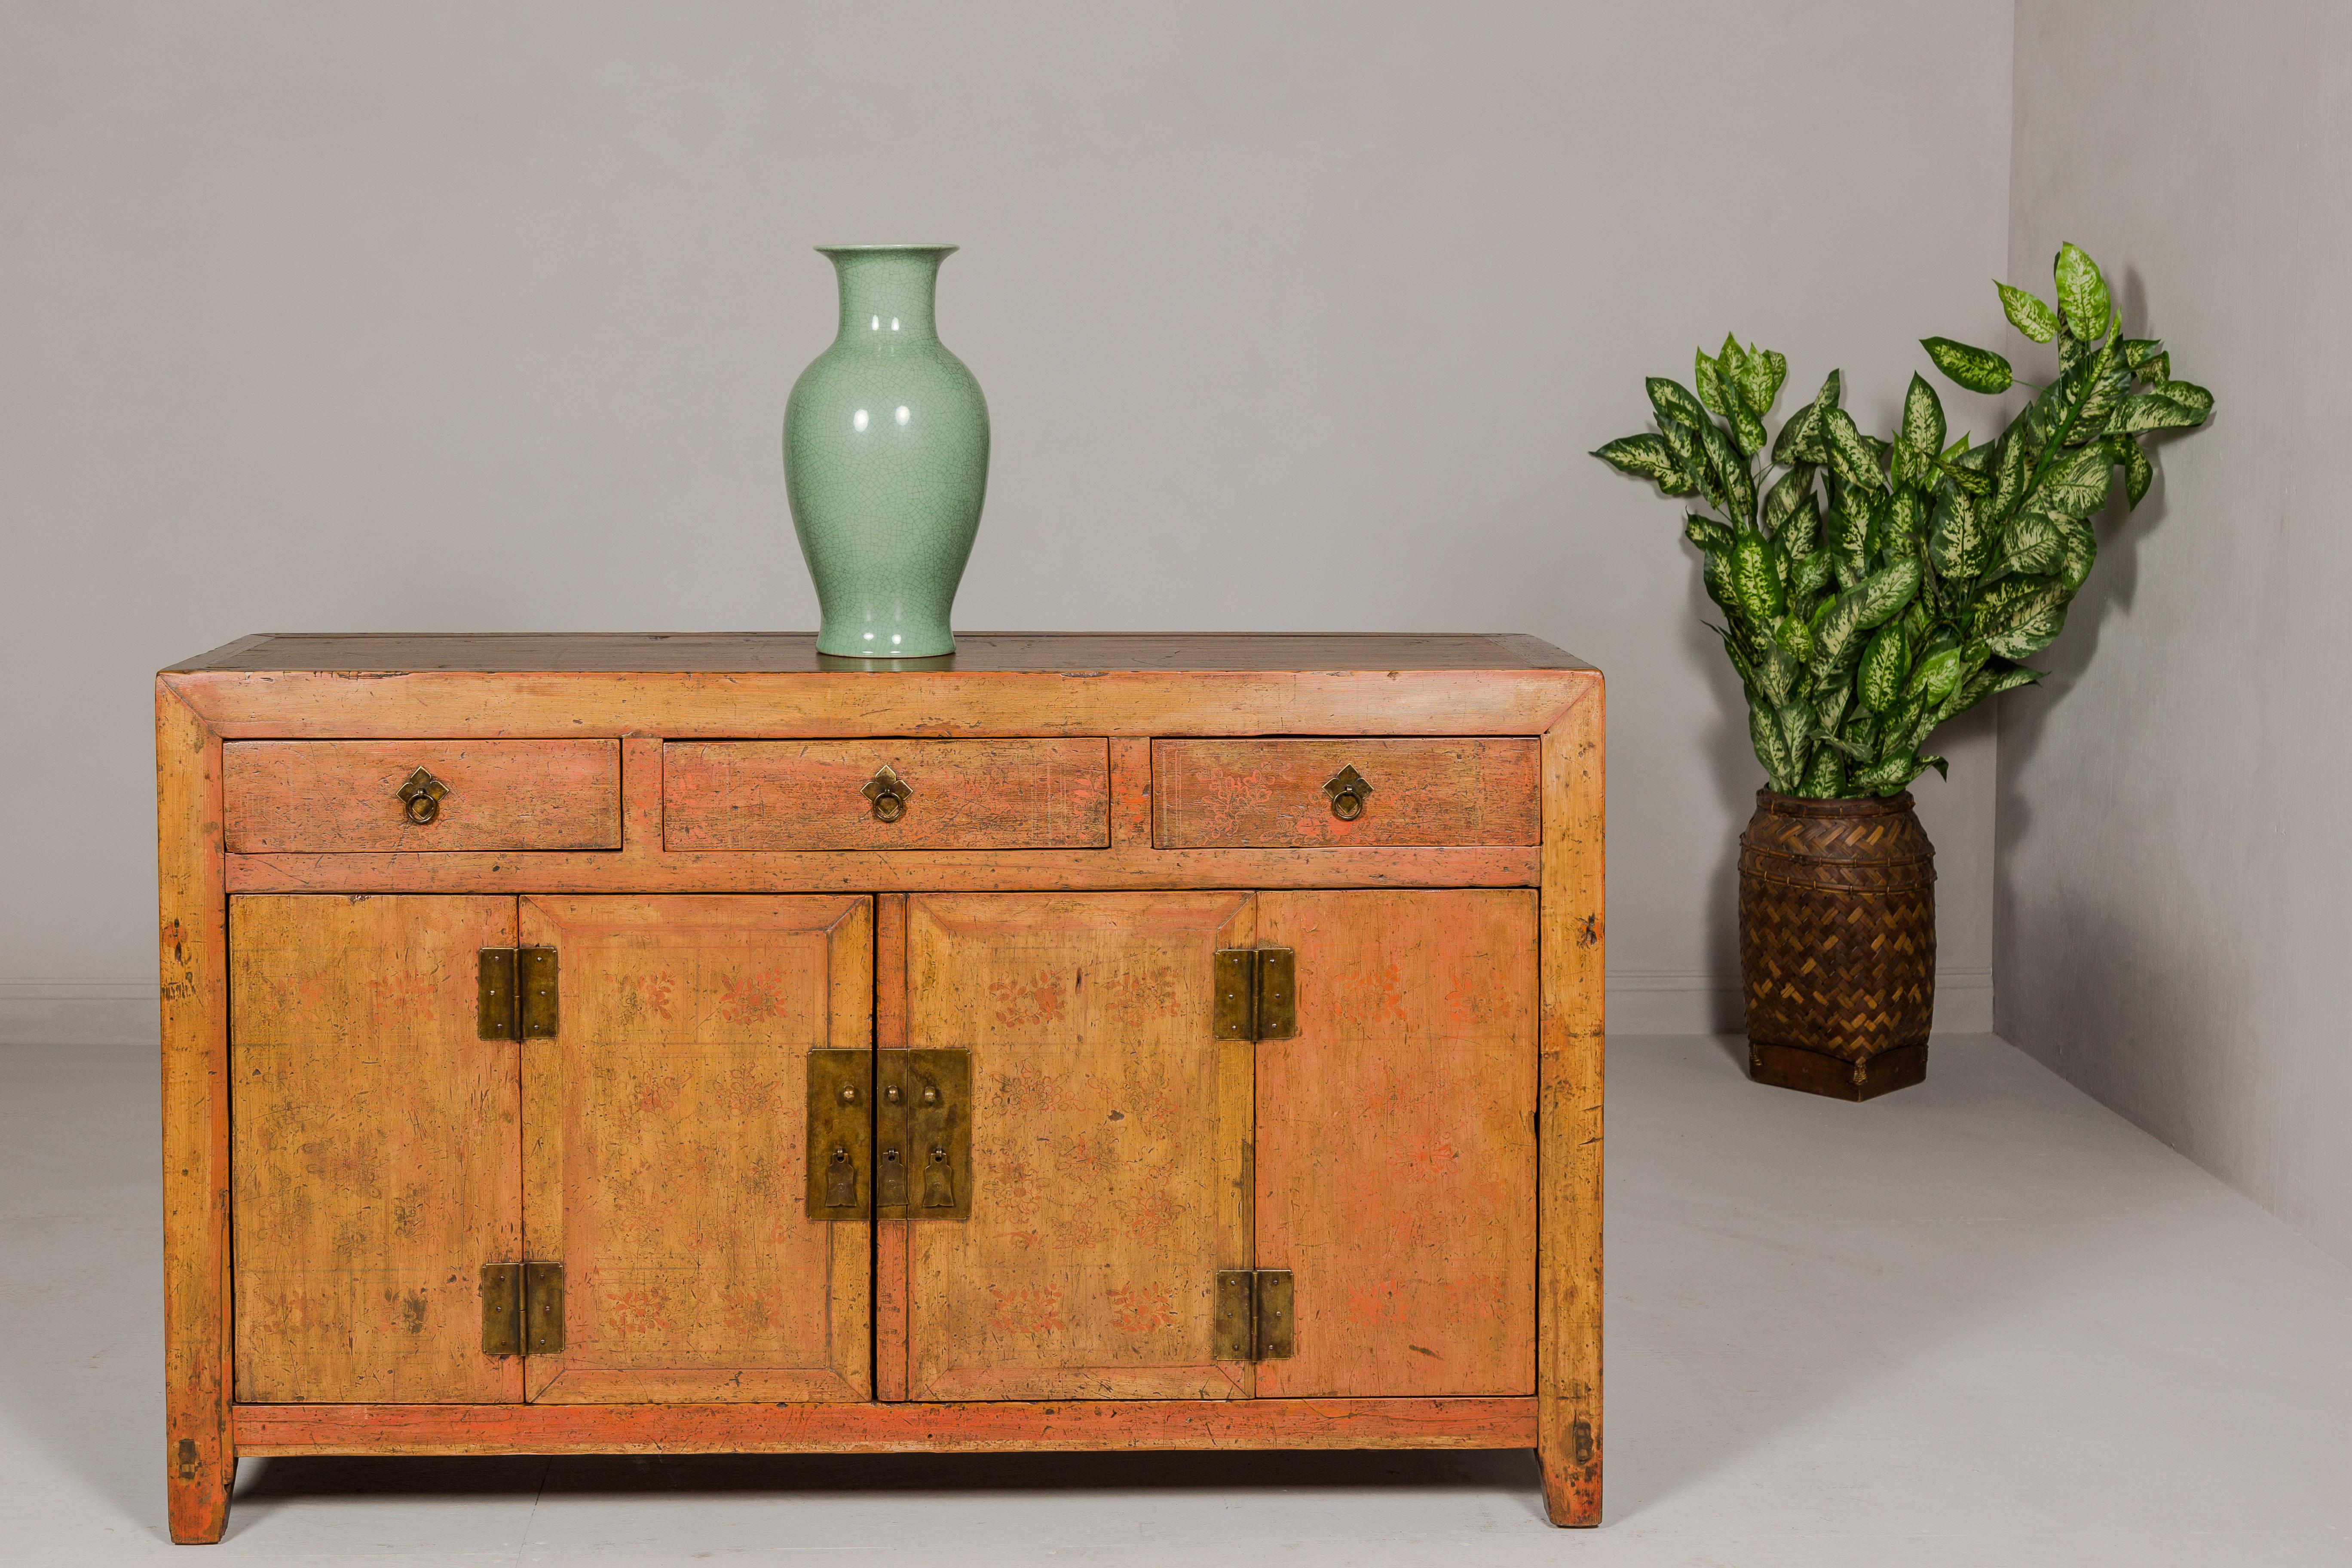 A Qing Dynasty period painted sideboard from the 19th century with distressed patina and three drawers over two doors. This Qing Dynasty period painted sideboard from the 19th century is a remarkable piece of historical furniture, showcasing the